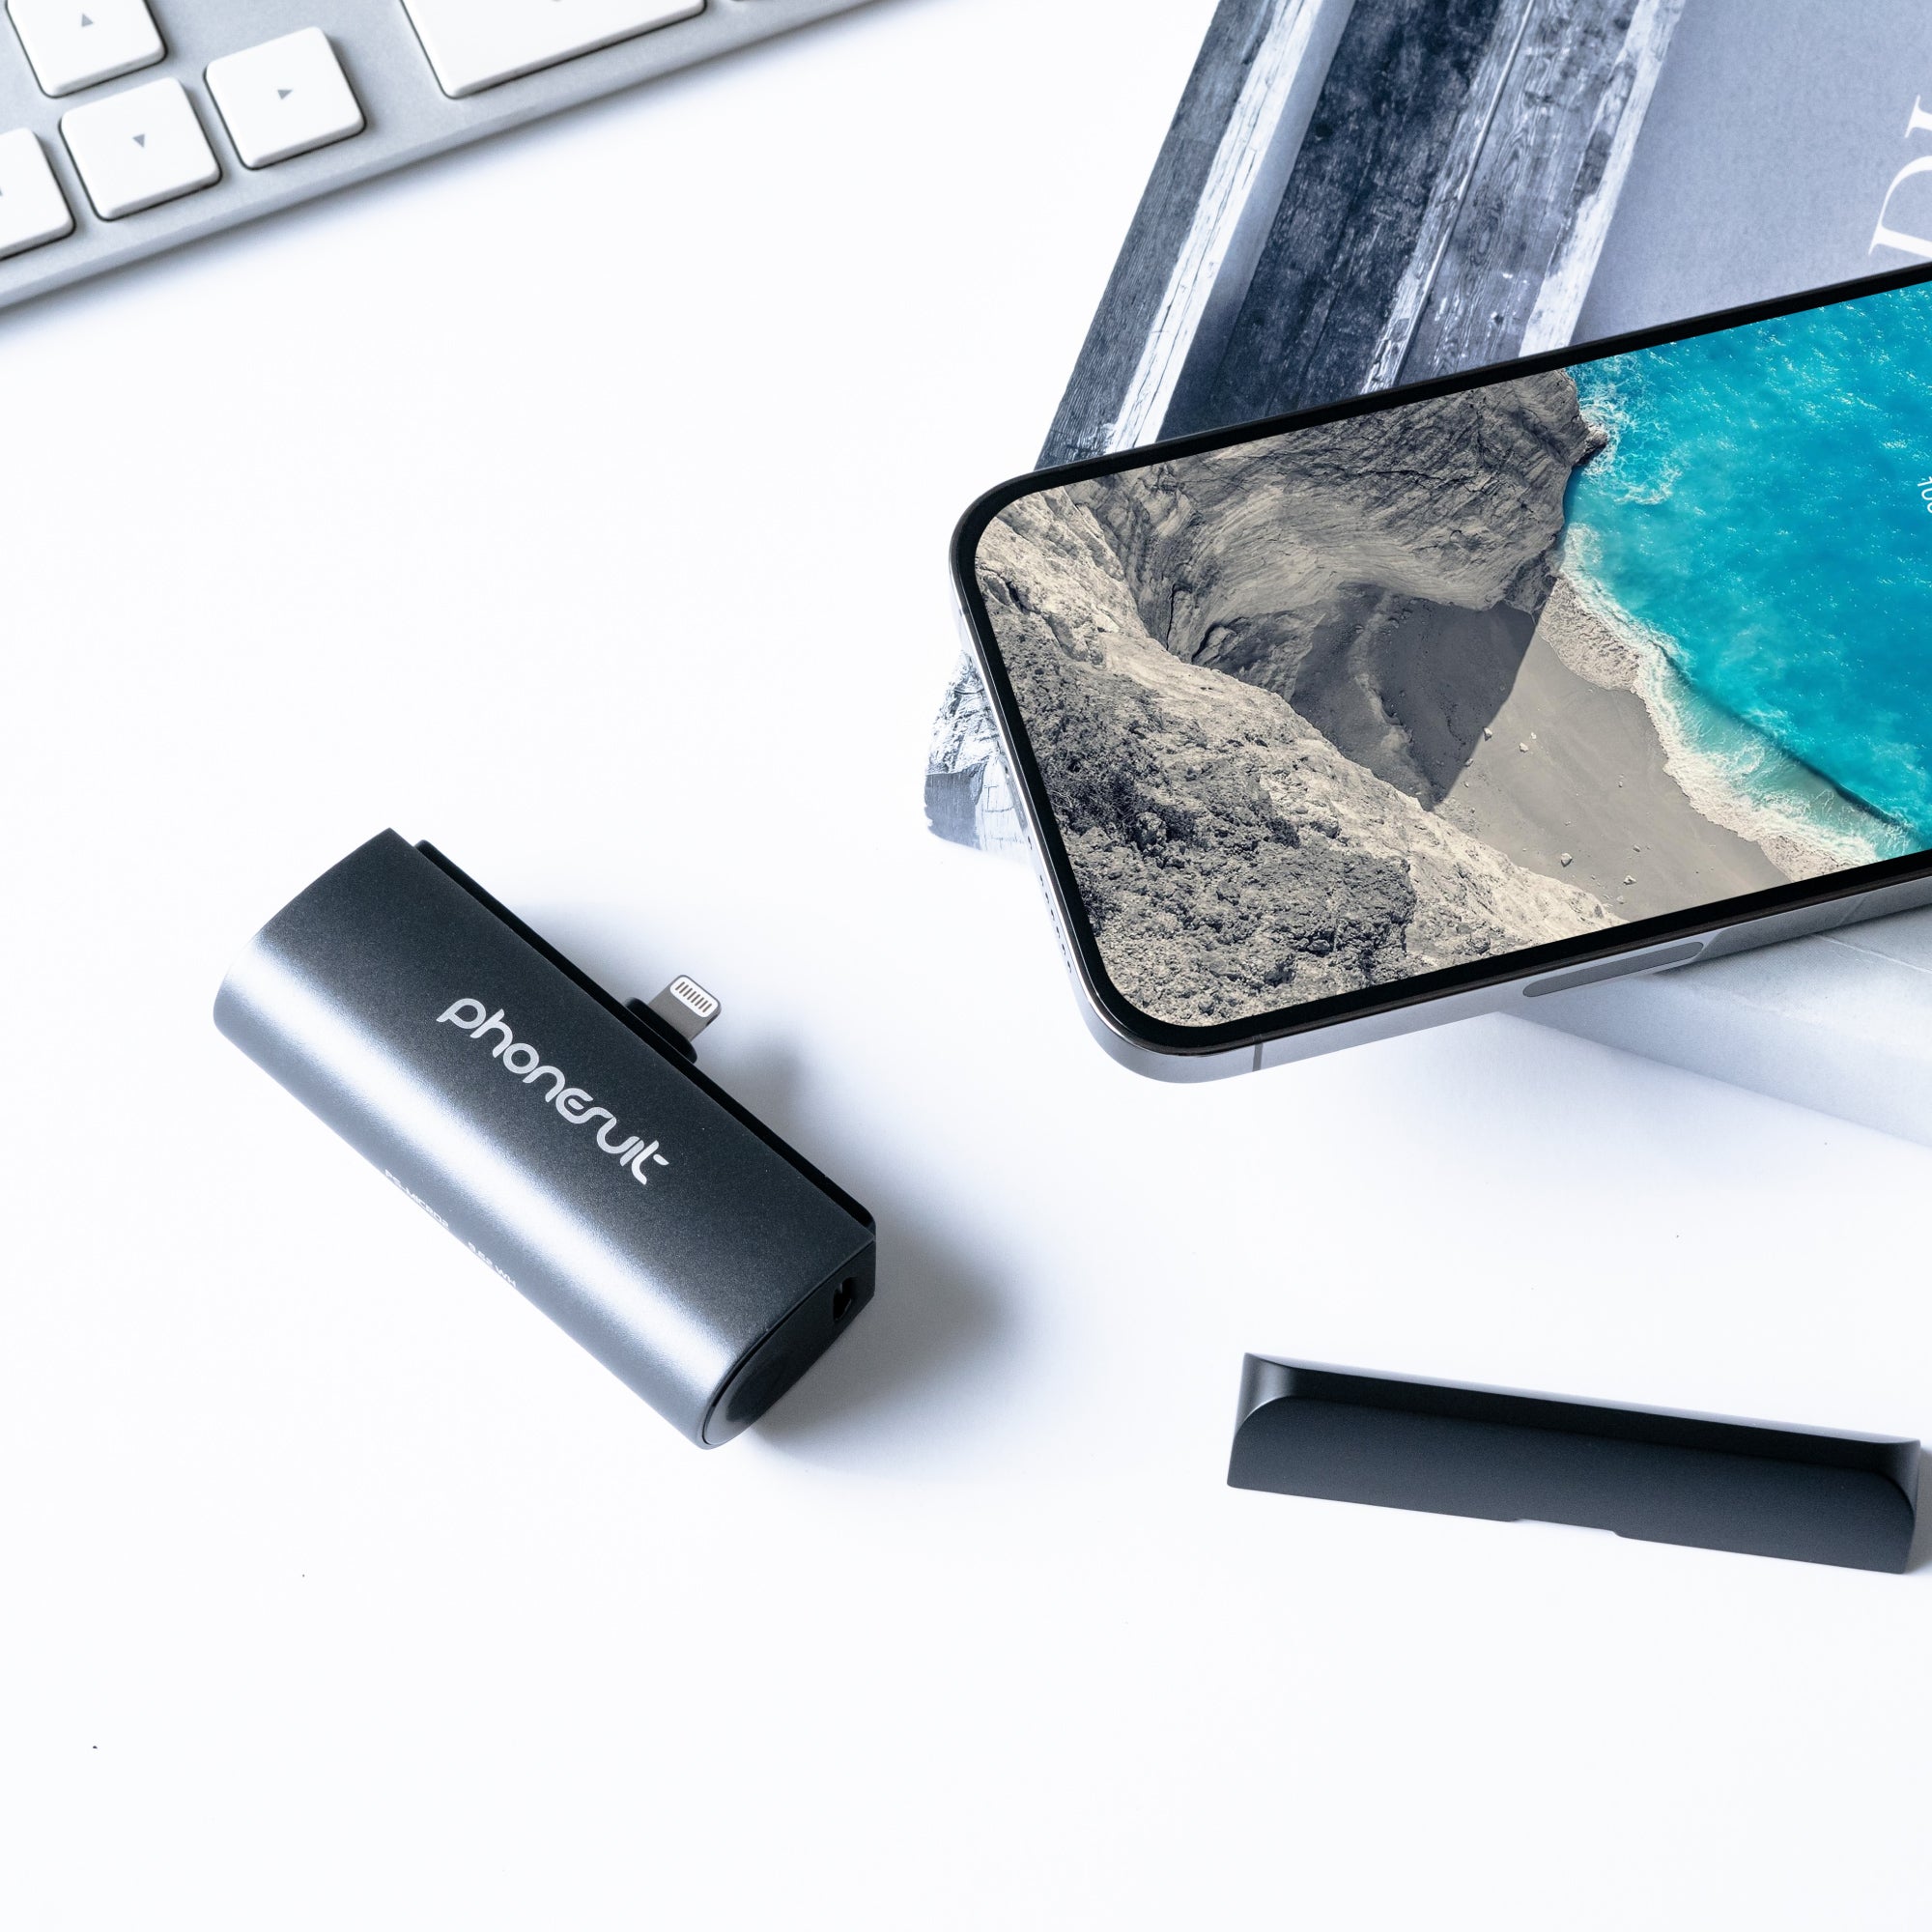 Flex XT | Portable Pocket Charger & Battery Pack | for iPhone